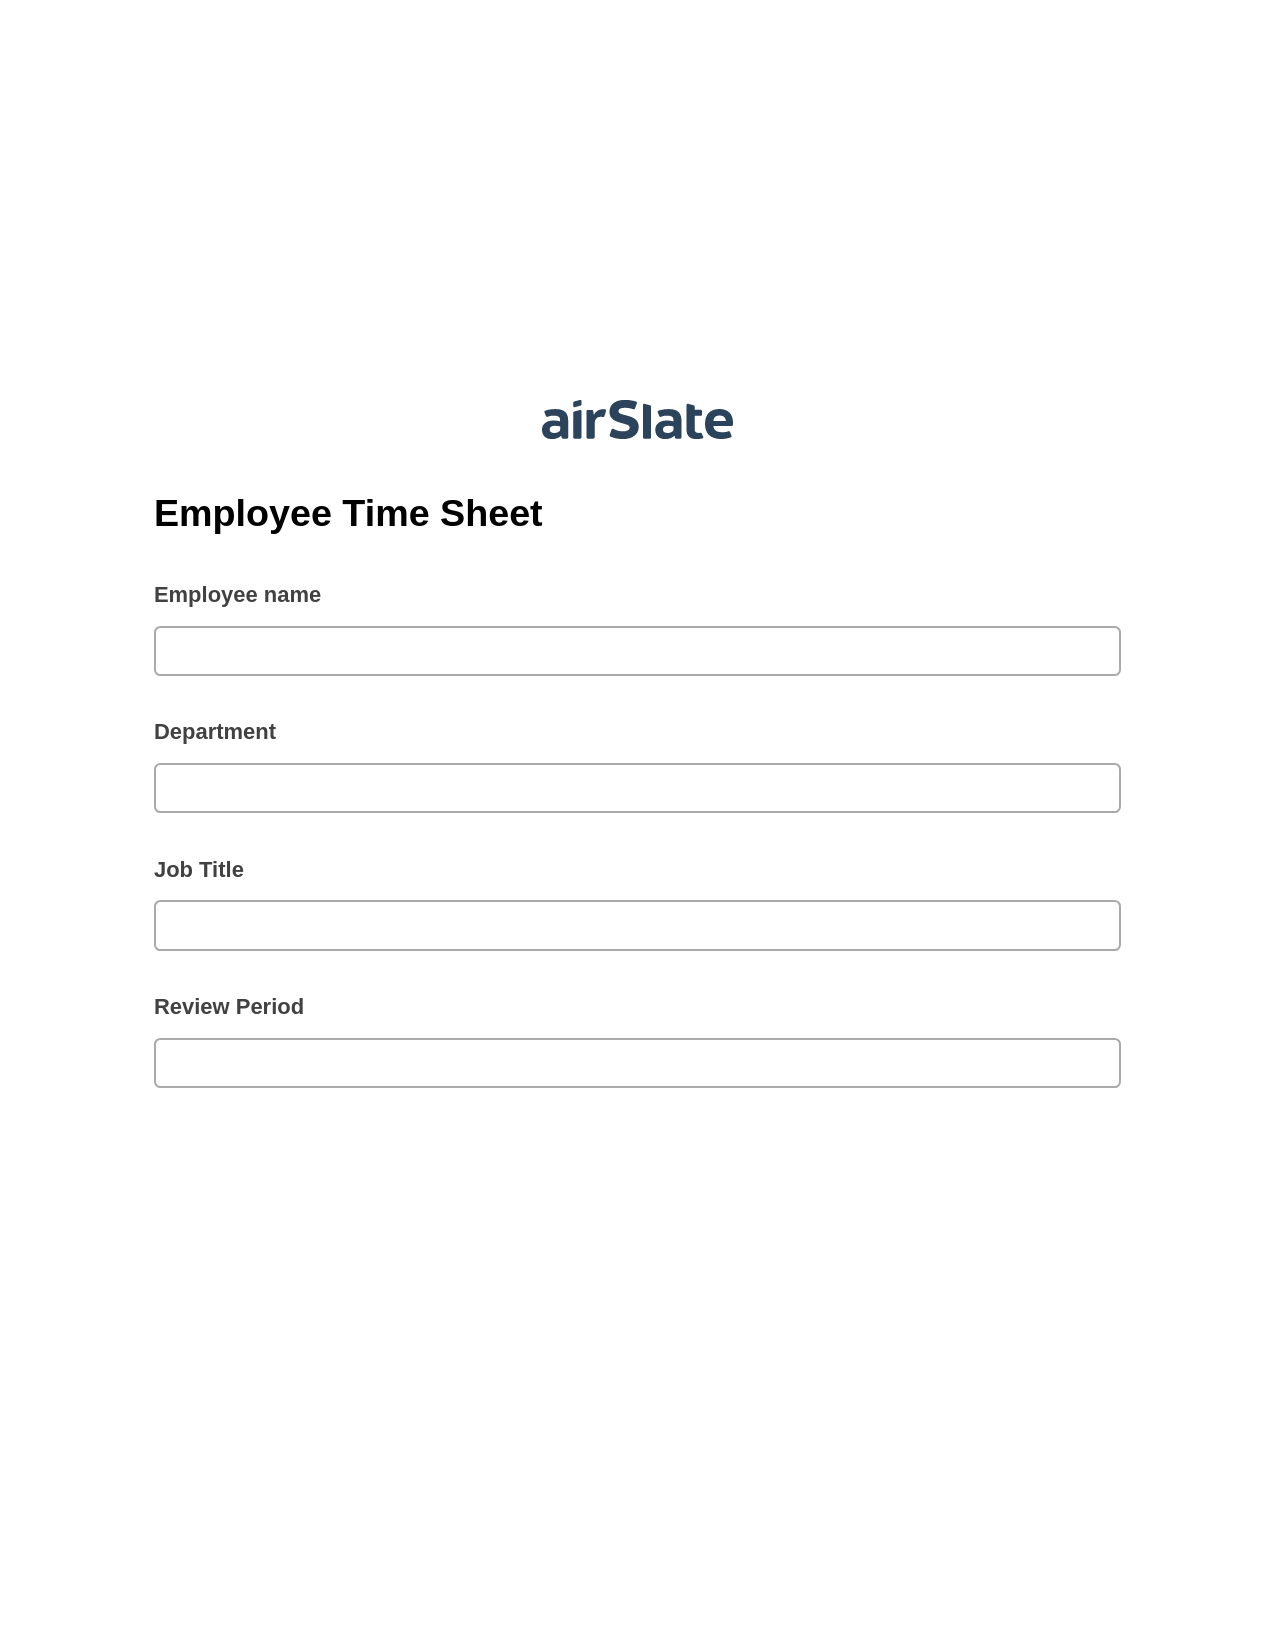 Employee Time Sheet Pre-fill Dropdowns from MySQL Bot, Update Audit Trail Bot, Archive to SharePoint Folder Bot